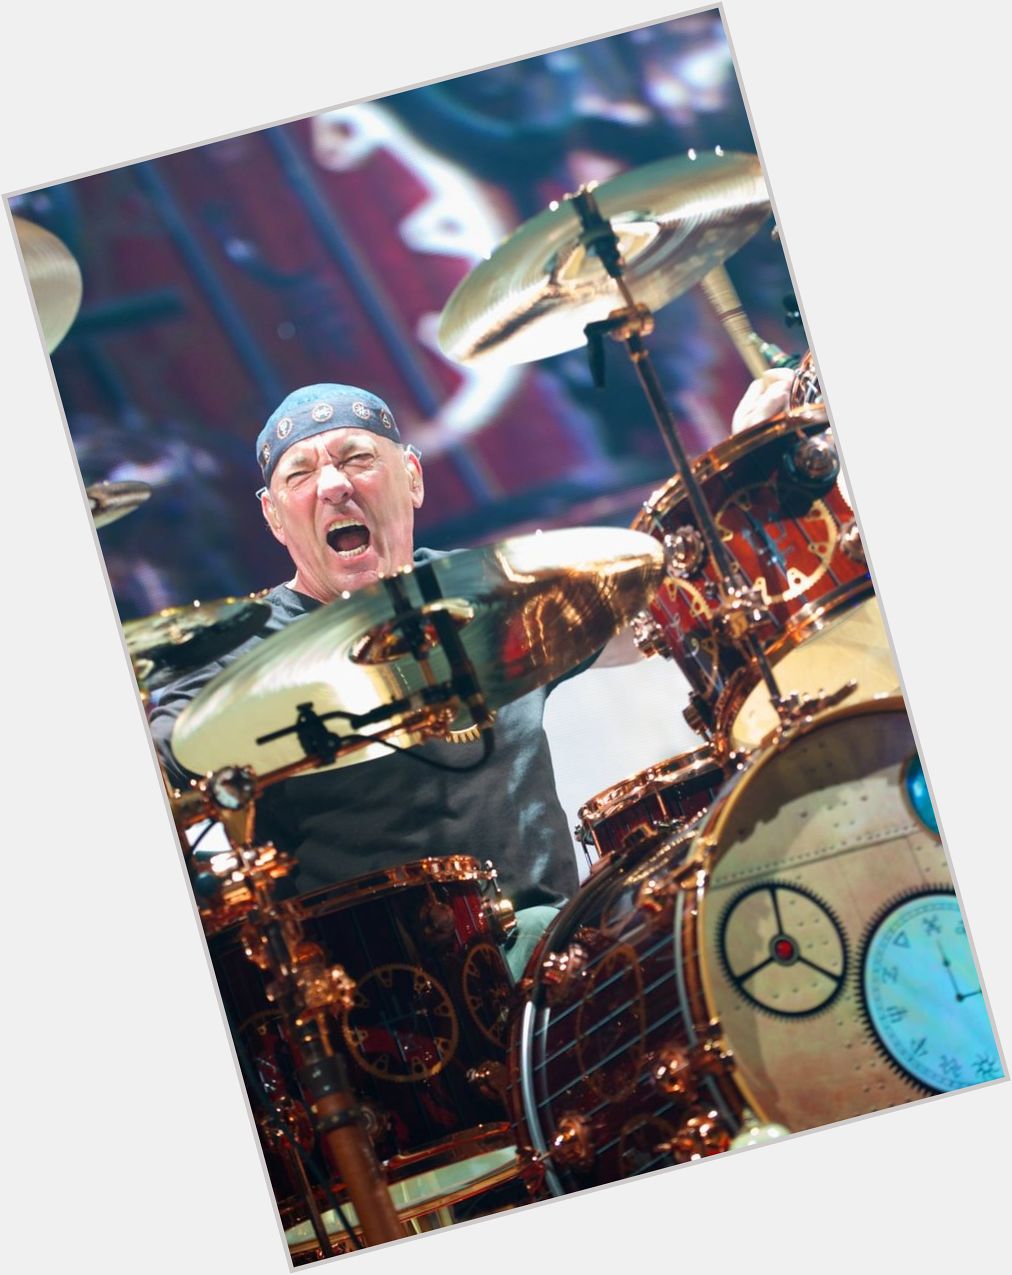 A very Happy Birthday to Rock god and music legend Neil Peart! Best of wishes sir! 